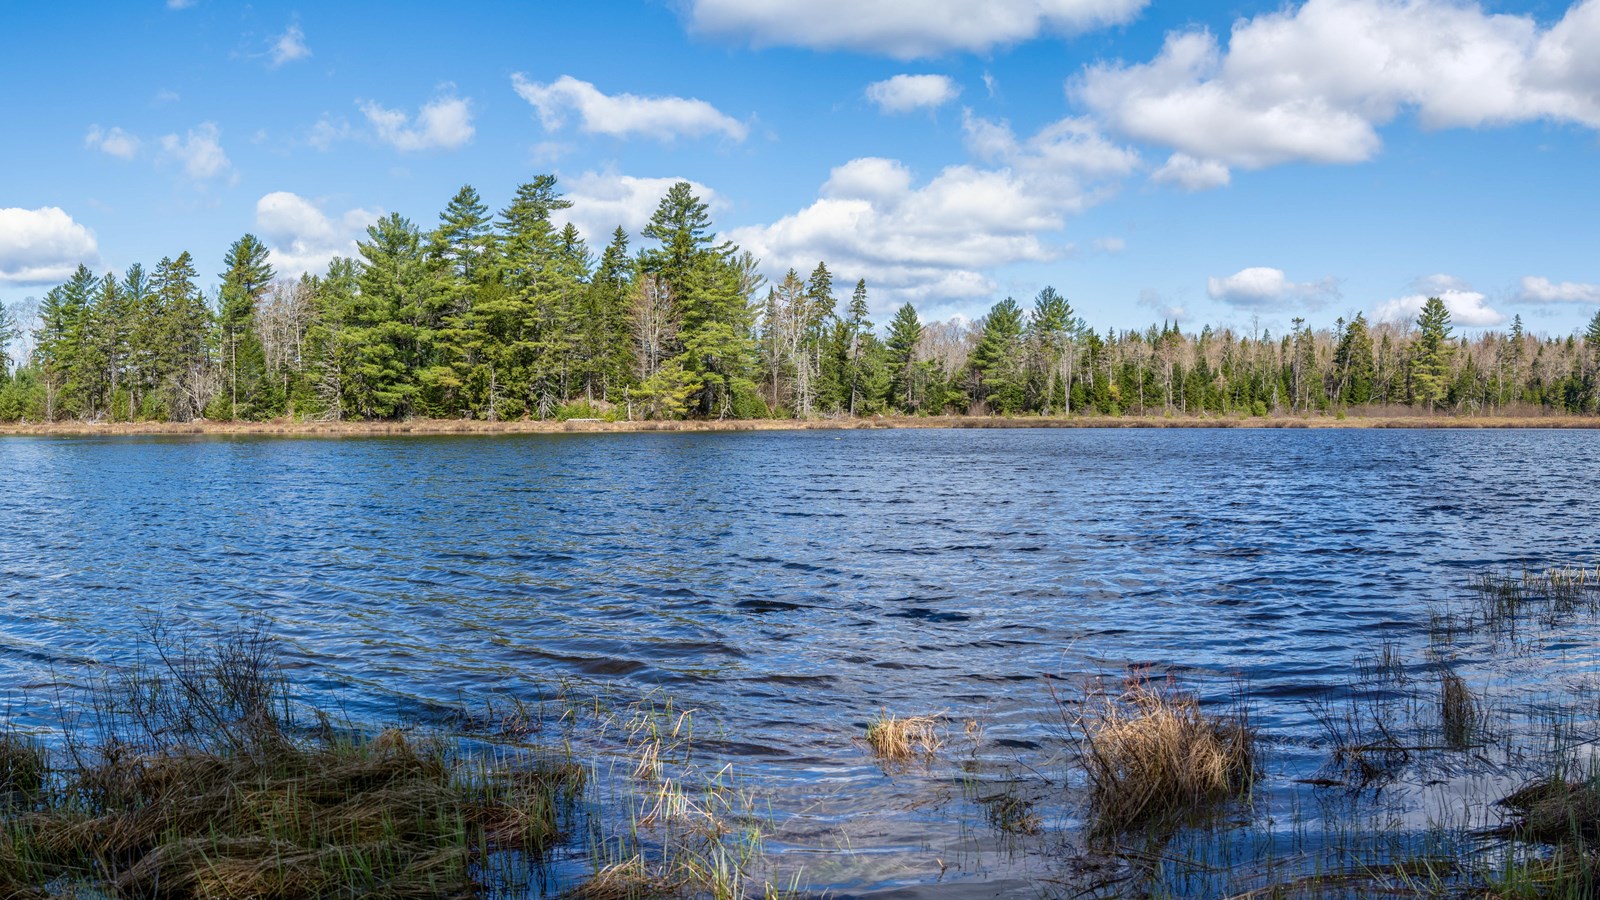 A panoramic photo of a pond with grassy shoreline and forest behind it on a blue sky cloudy day.